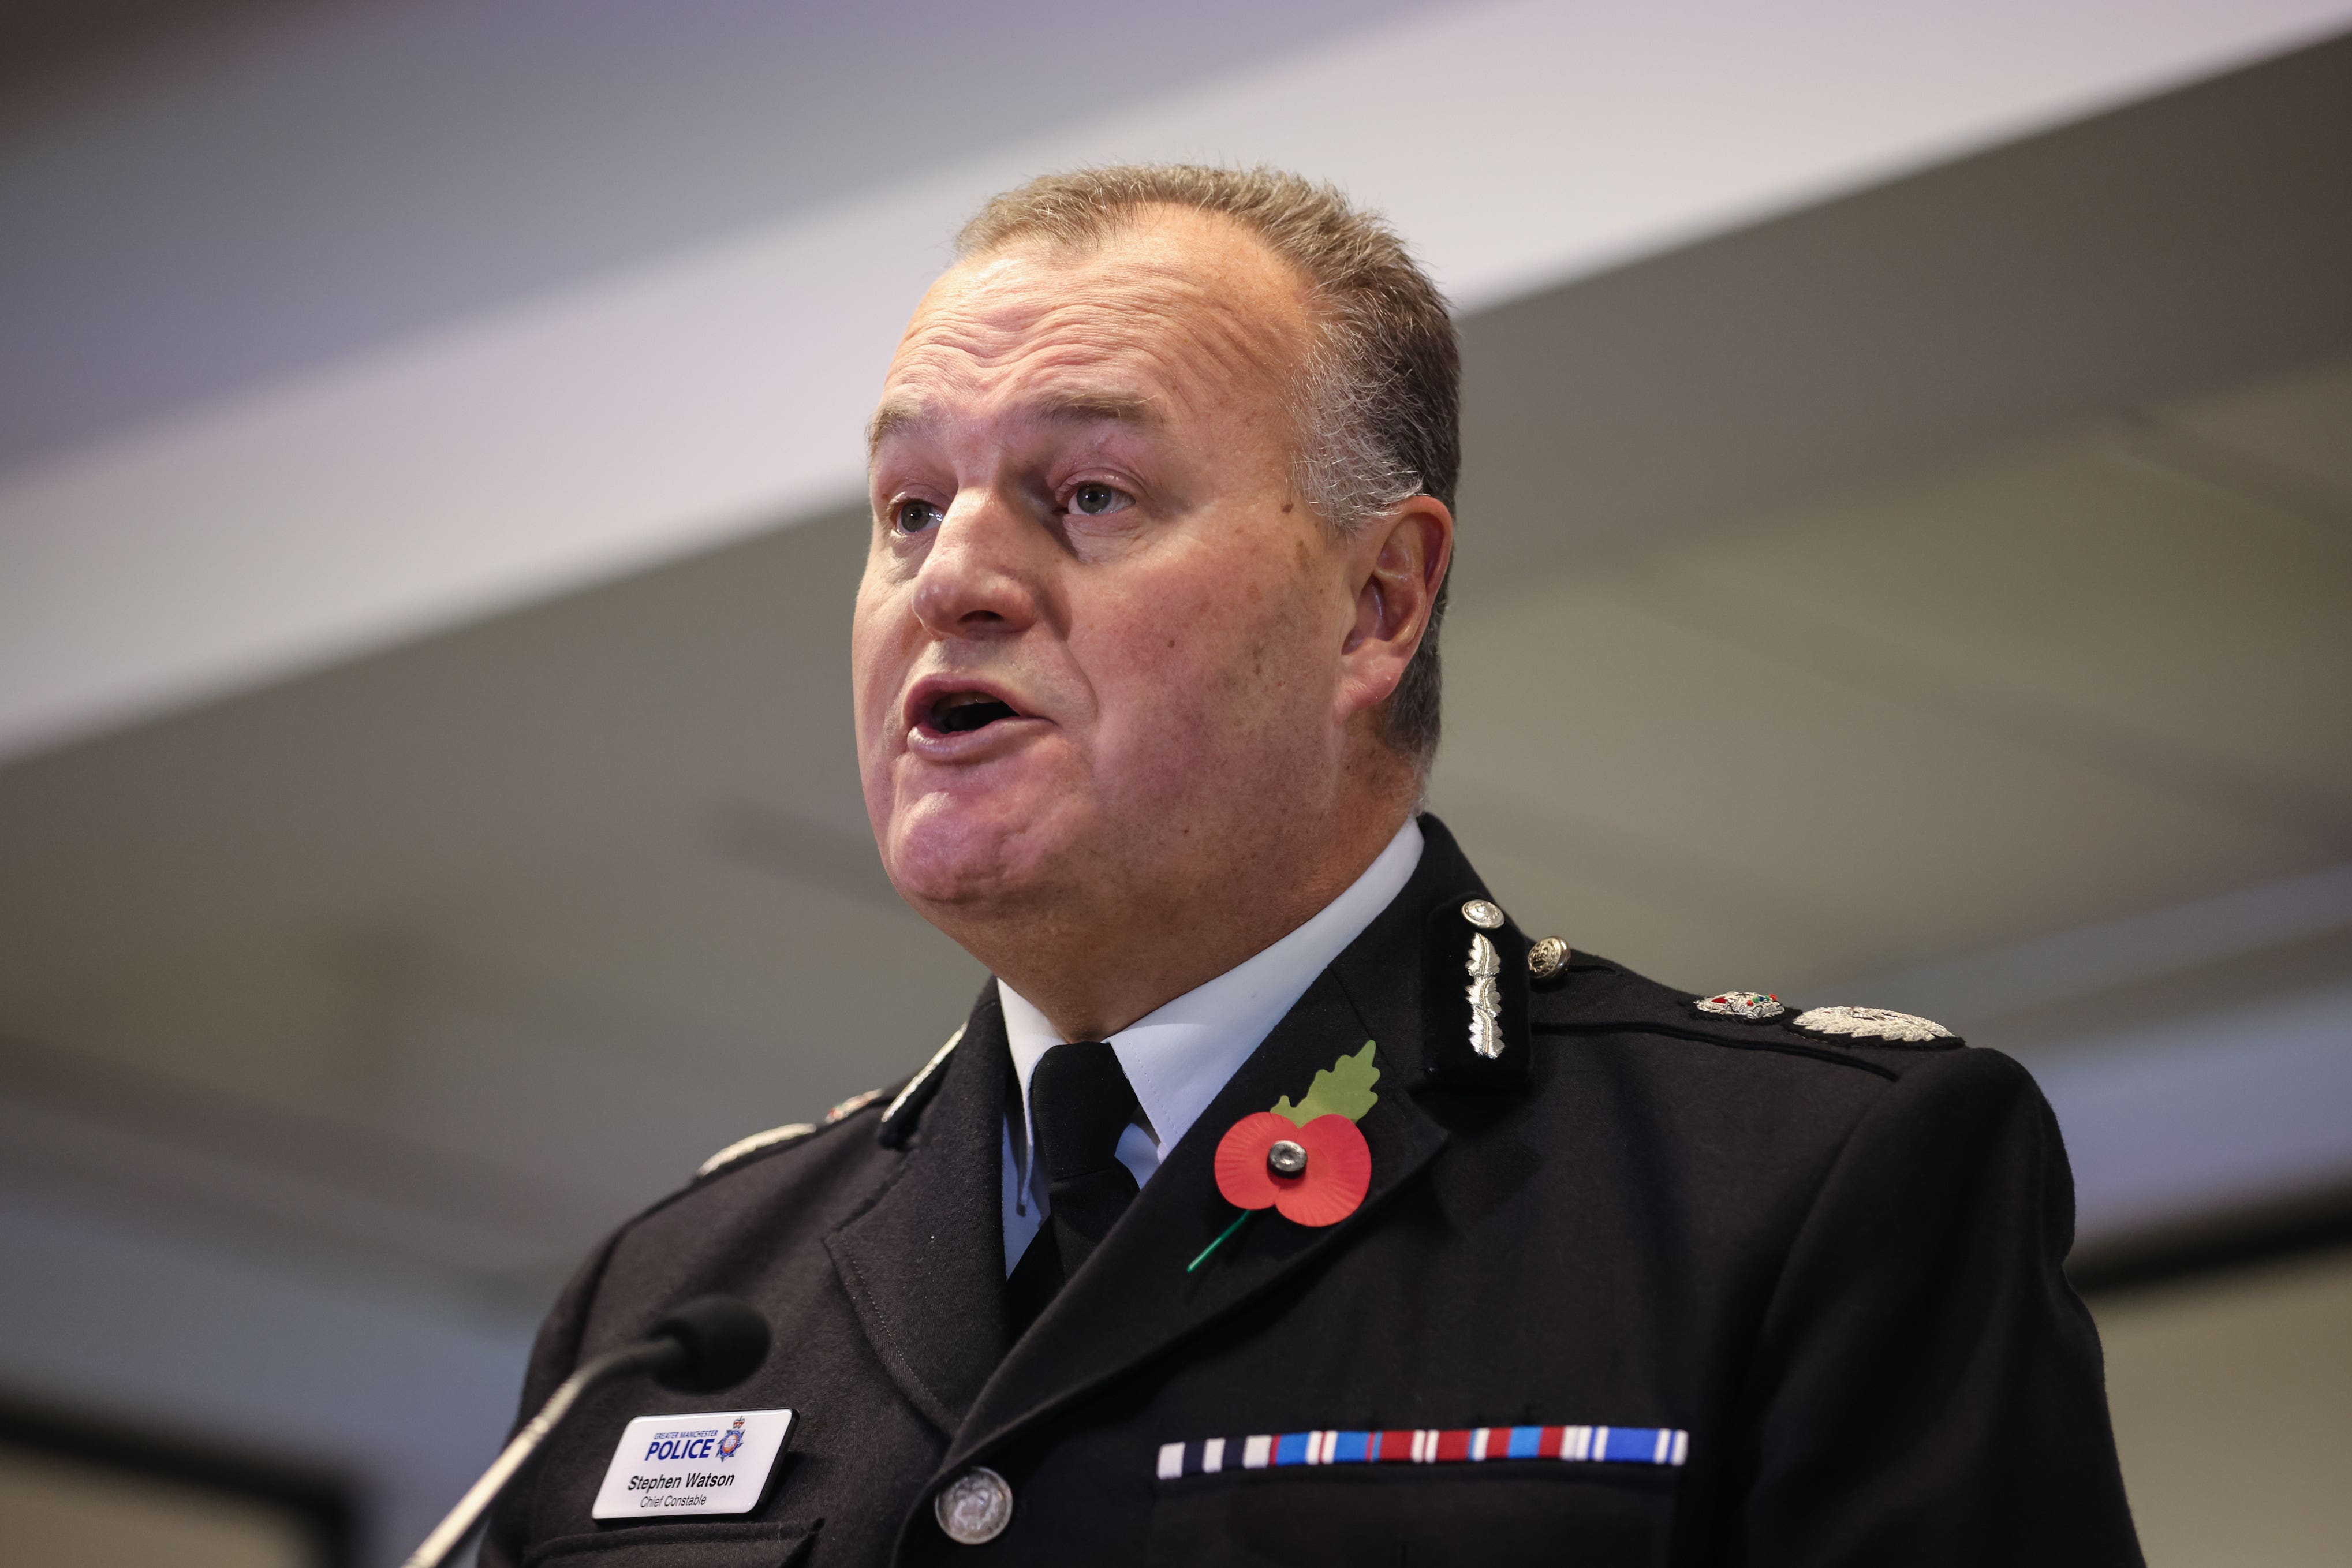 Greater Manchester Police Chief Constable Stephen Watson made the remarks on BBC Radio Manchester (James Speakman/PA)